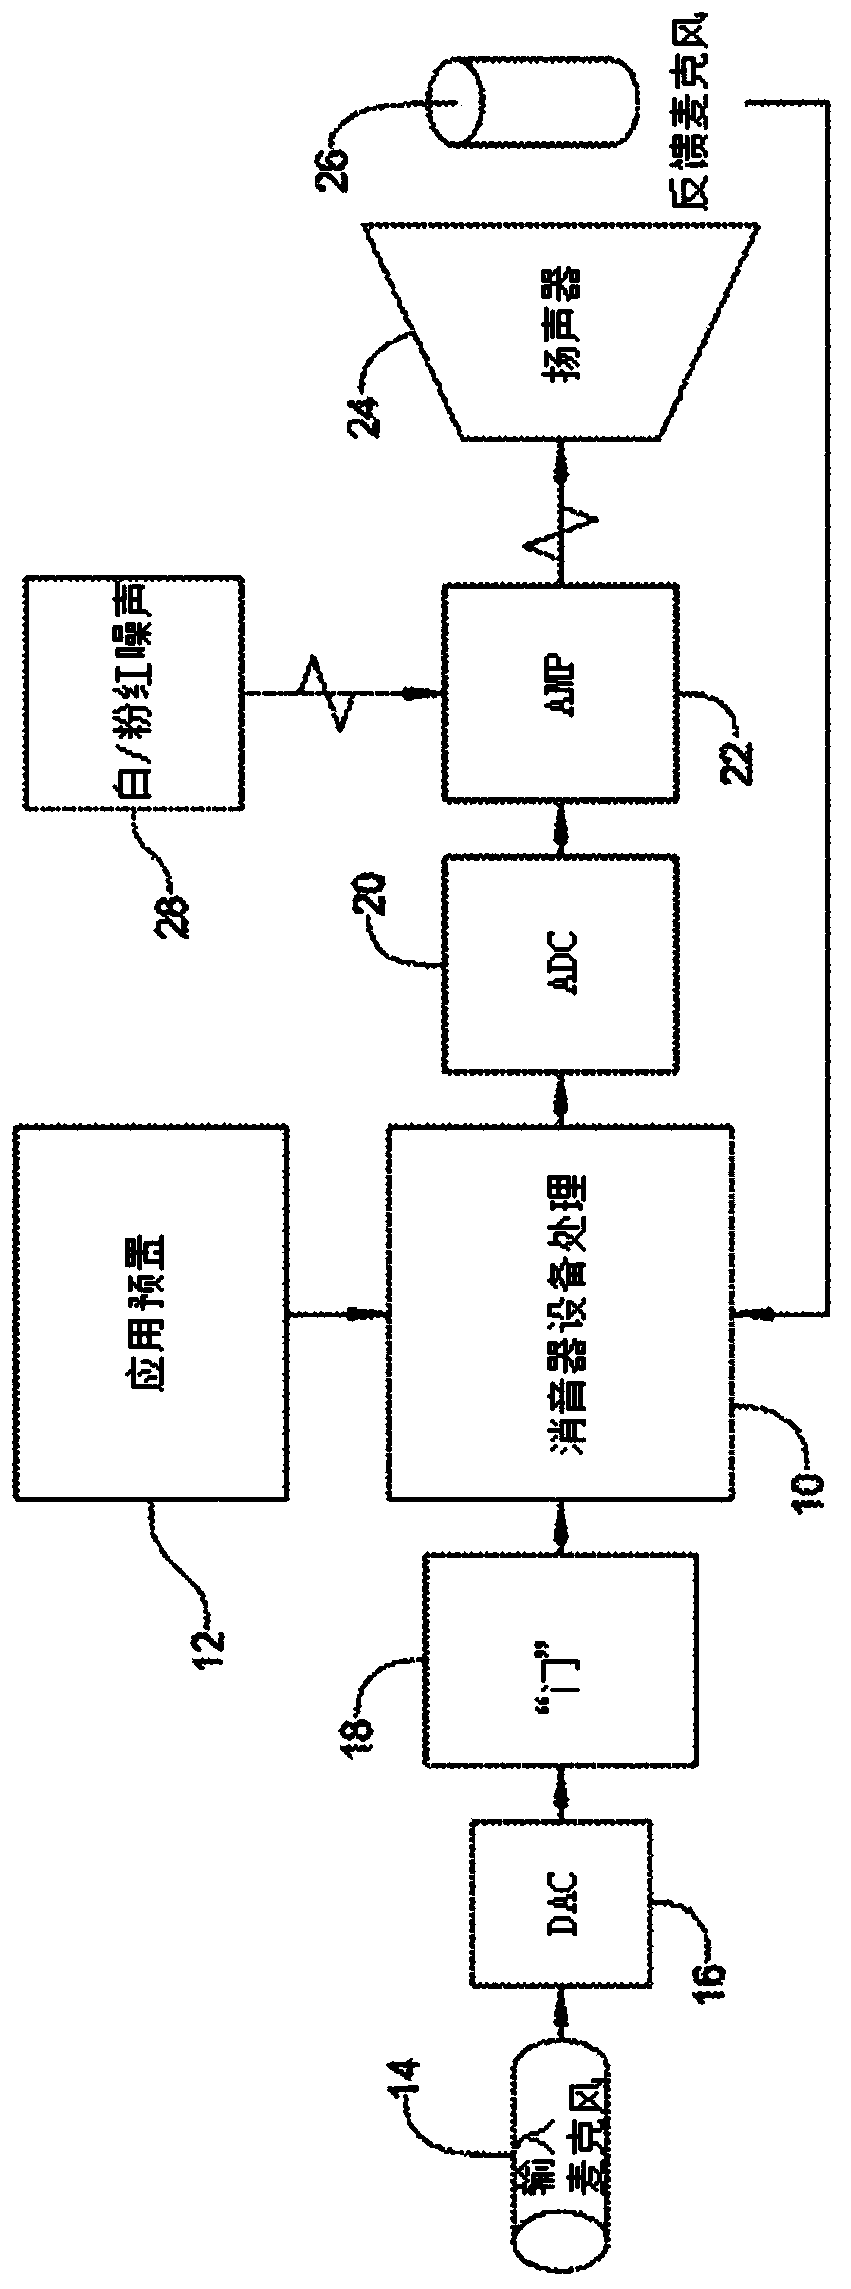 Noise cancellation using segmented, frequency-dependent phase cancellation